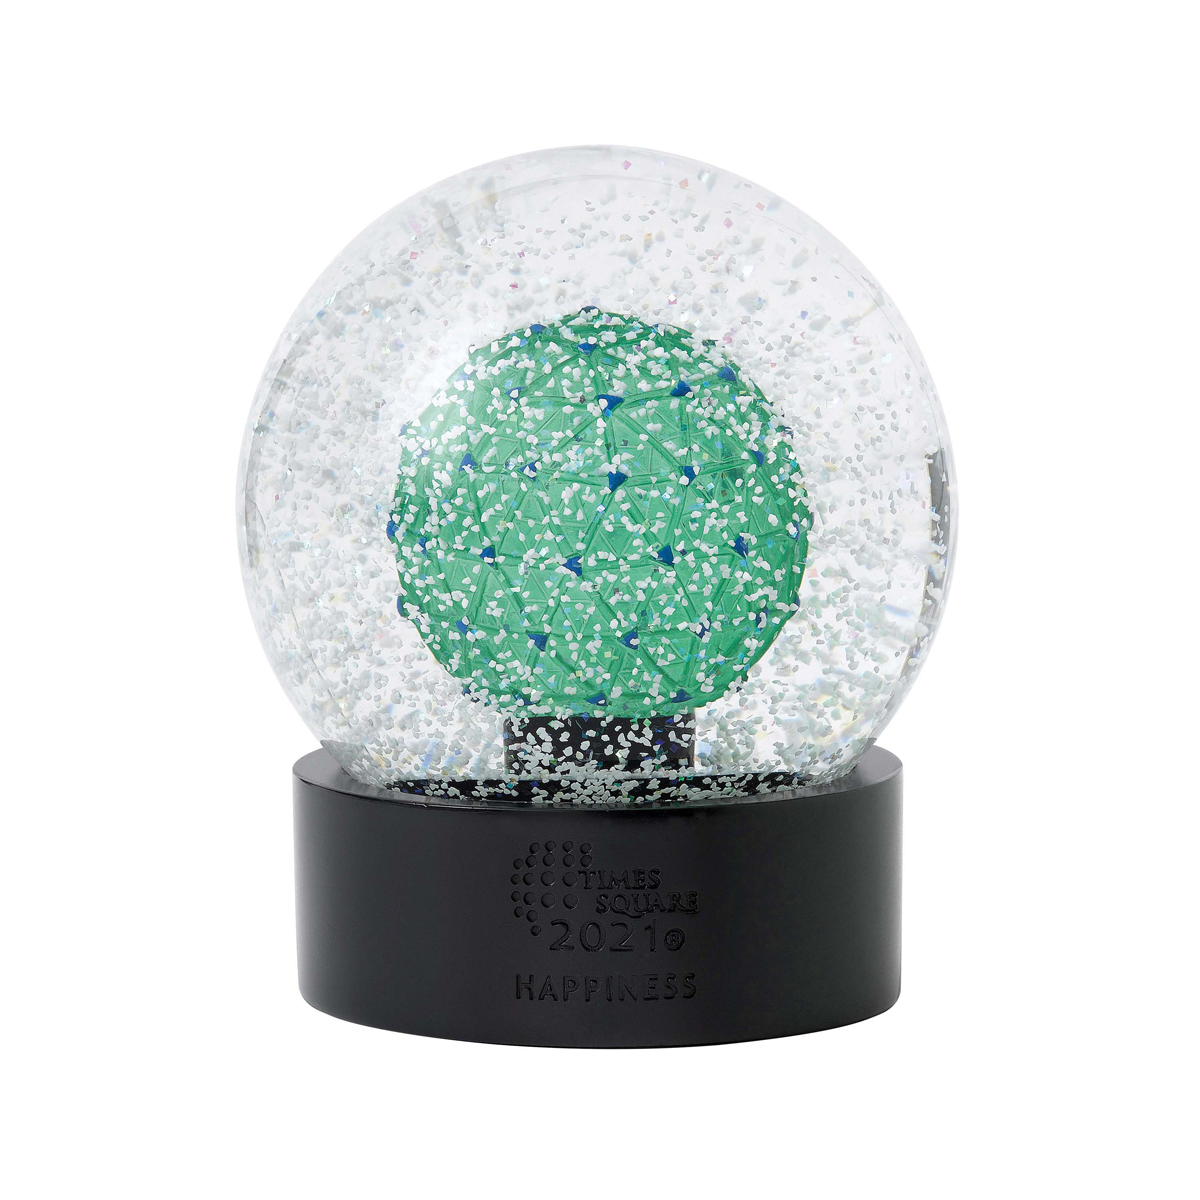 Waterford 2021 Times Square Snowglobe